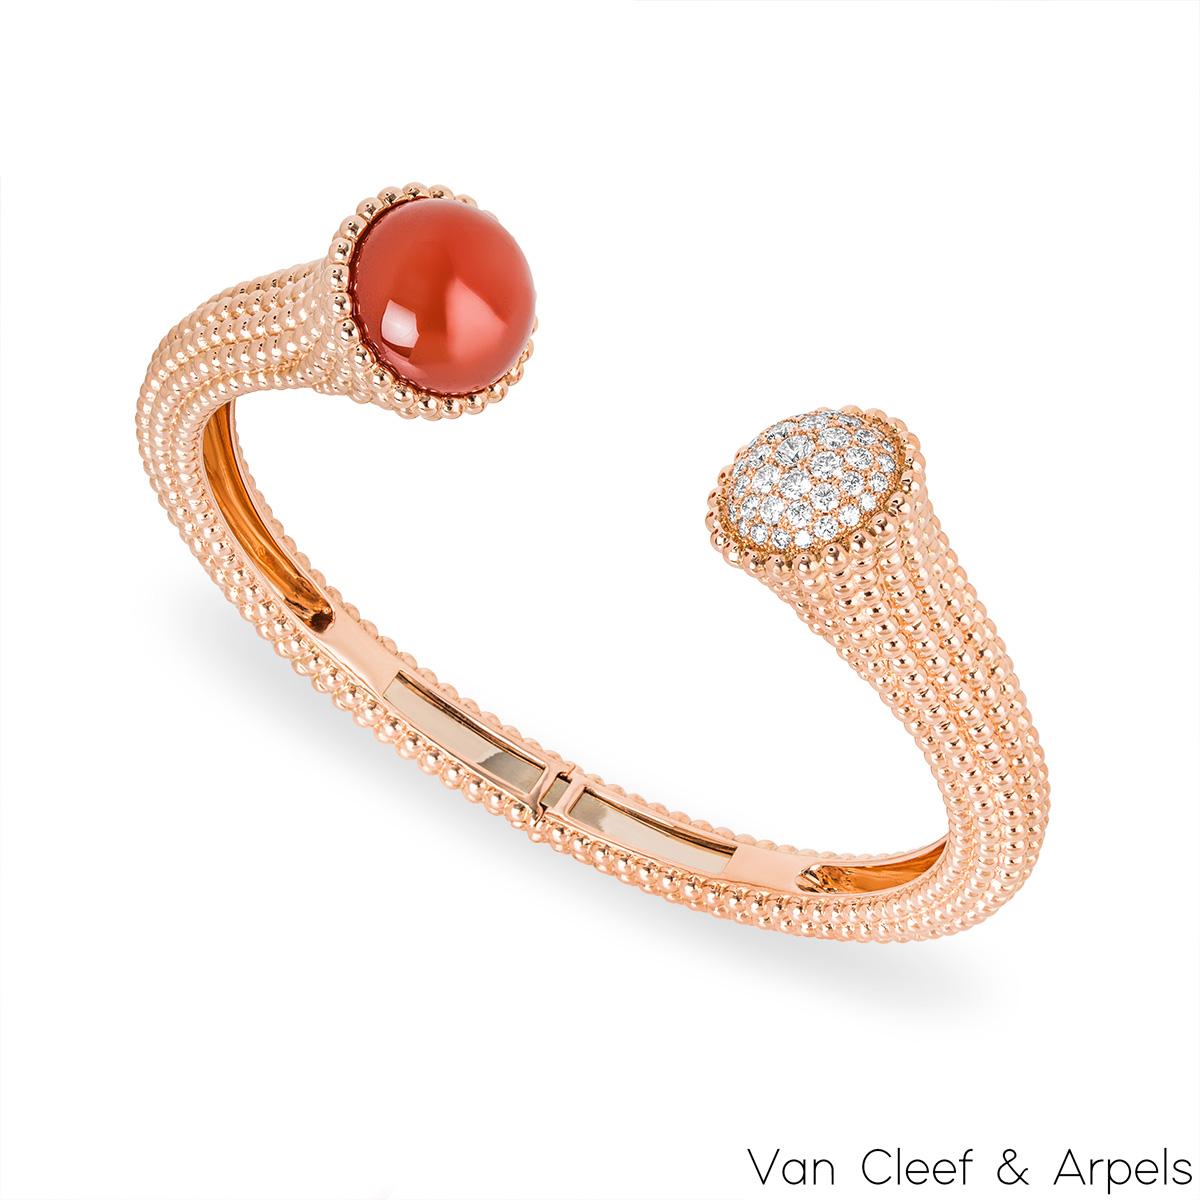 A stunning 18k rose gold diamond and carnelian bracelet by Van Cleef & Arpels from the Perlée Couleurs collection. The cuff style bracelet is adorned with a beaded design throughout and finishes with one diamond set termination and one carnelian